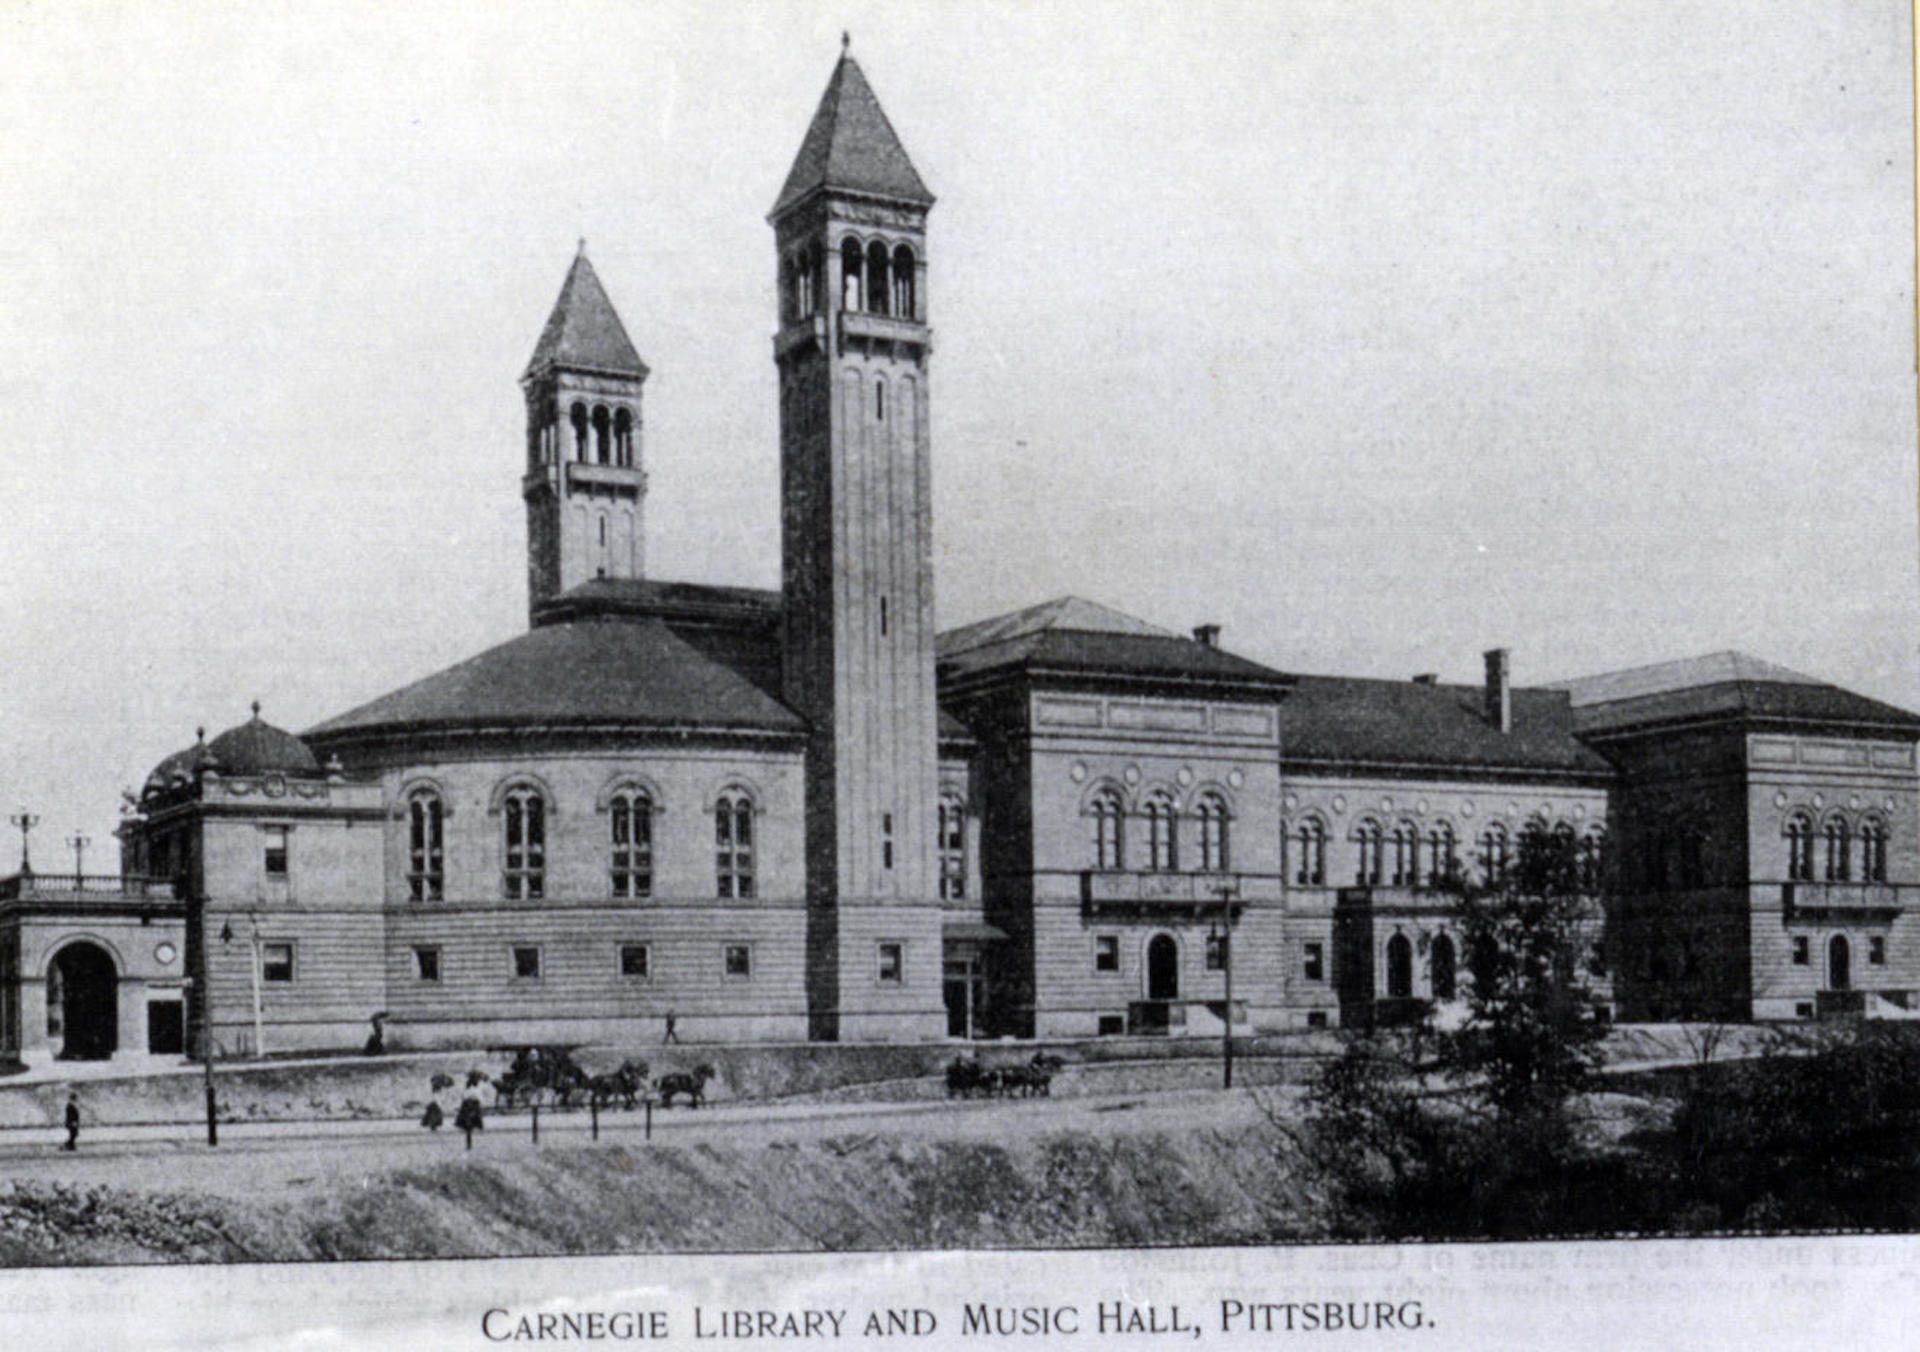 Carnegie Library and Music Hall in Pittsburgh's Oakland neighborhood pictured after its 1895 construction. Industrialist Andrew Carnegie funded the construction of the structures in hopes that they would become cultural complexes of learning.